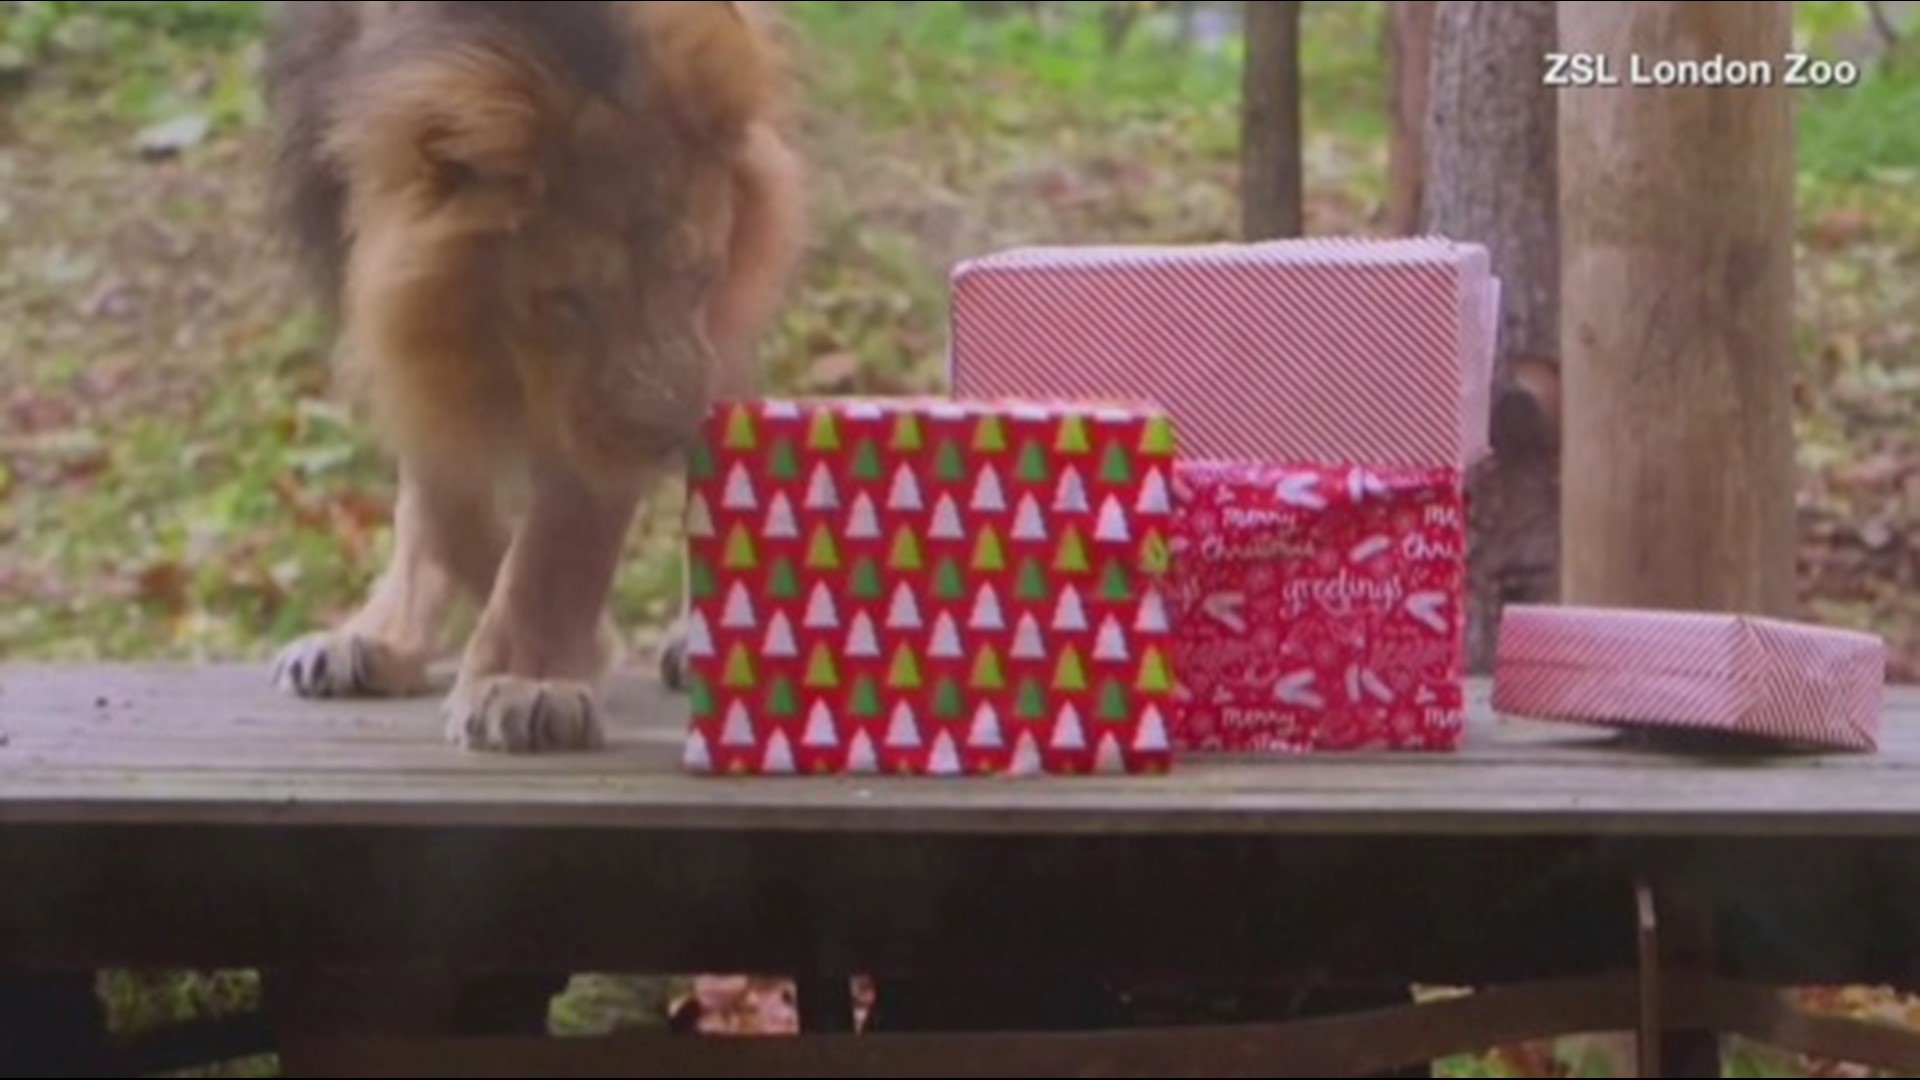 These ZSL London Zoo residents look to be enjoying their Christmas gifts. Buzz60's Keri Lumm shares the sweet video.